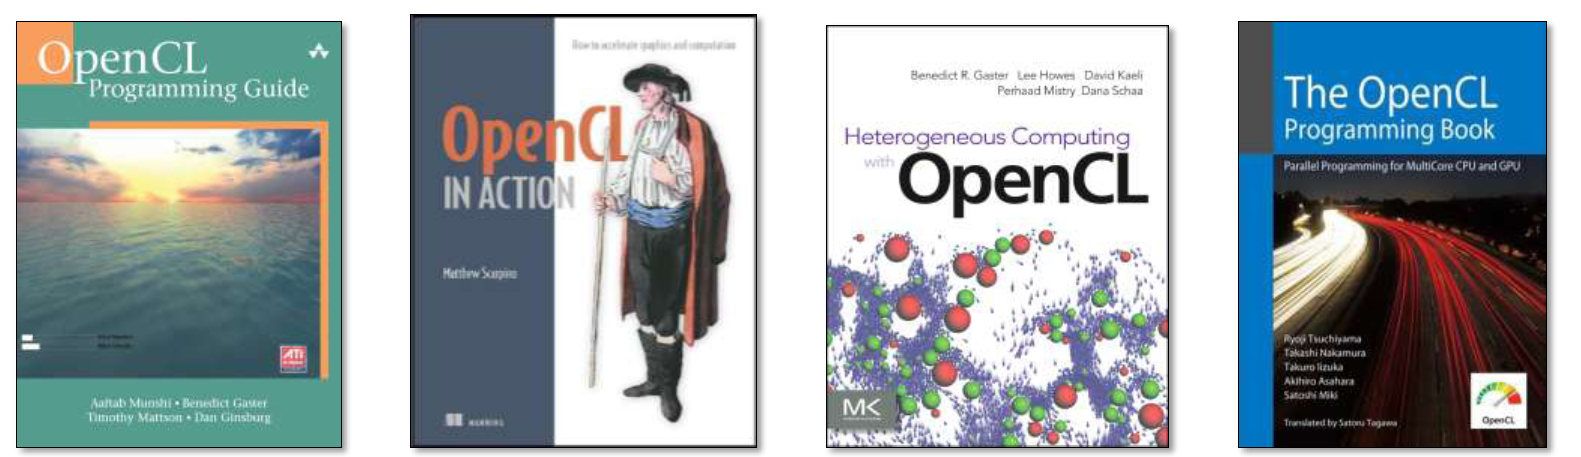 OpenCL könyvek OpenCL Programming Guide - The Red Book of OpenCL http://www.amazon.com/opencl-programming-guide-aaftab-munshi/dp/0321749642 OpenCL in Action http://www.amazon.com/opencl-action-accelerate-graphics-computations/dp/1617290173/ Heterogeneous Computing with OpenCL http://www.